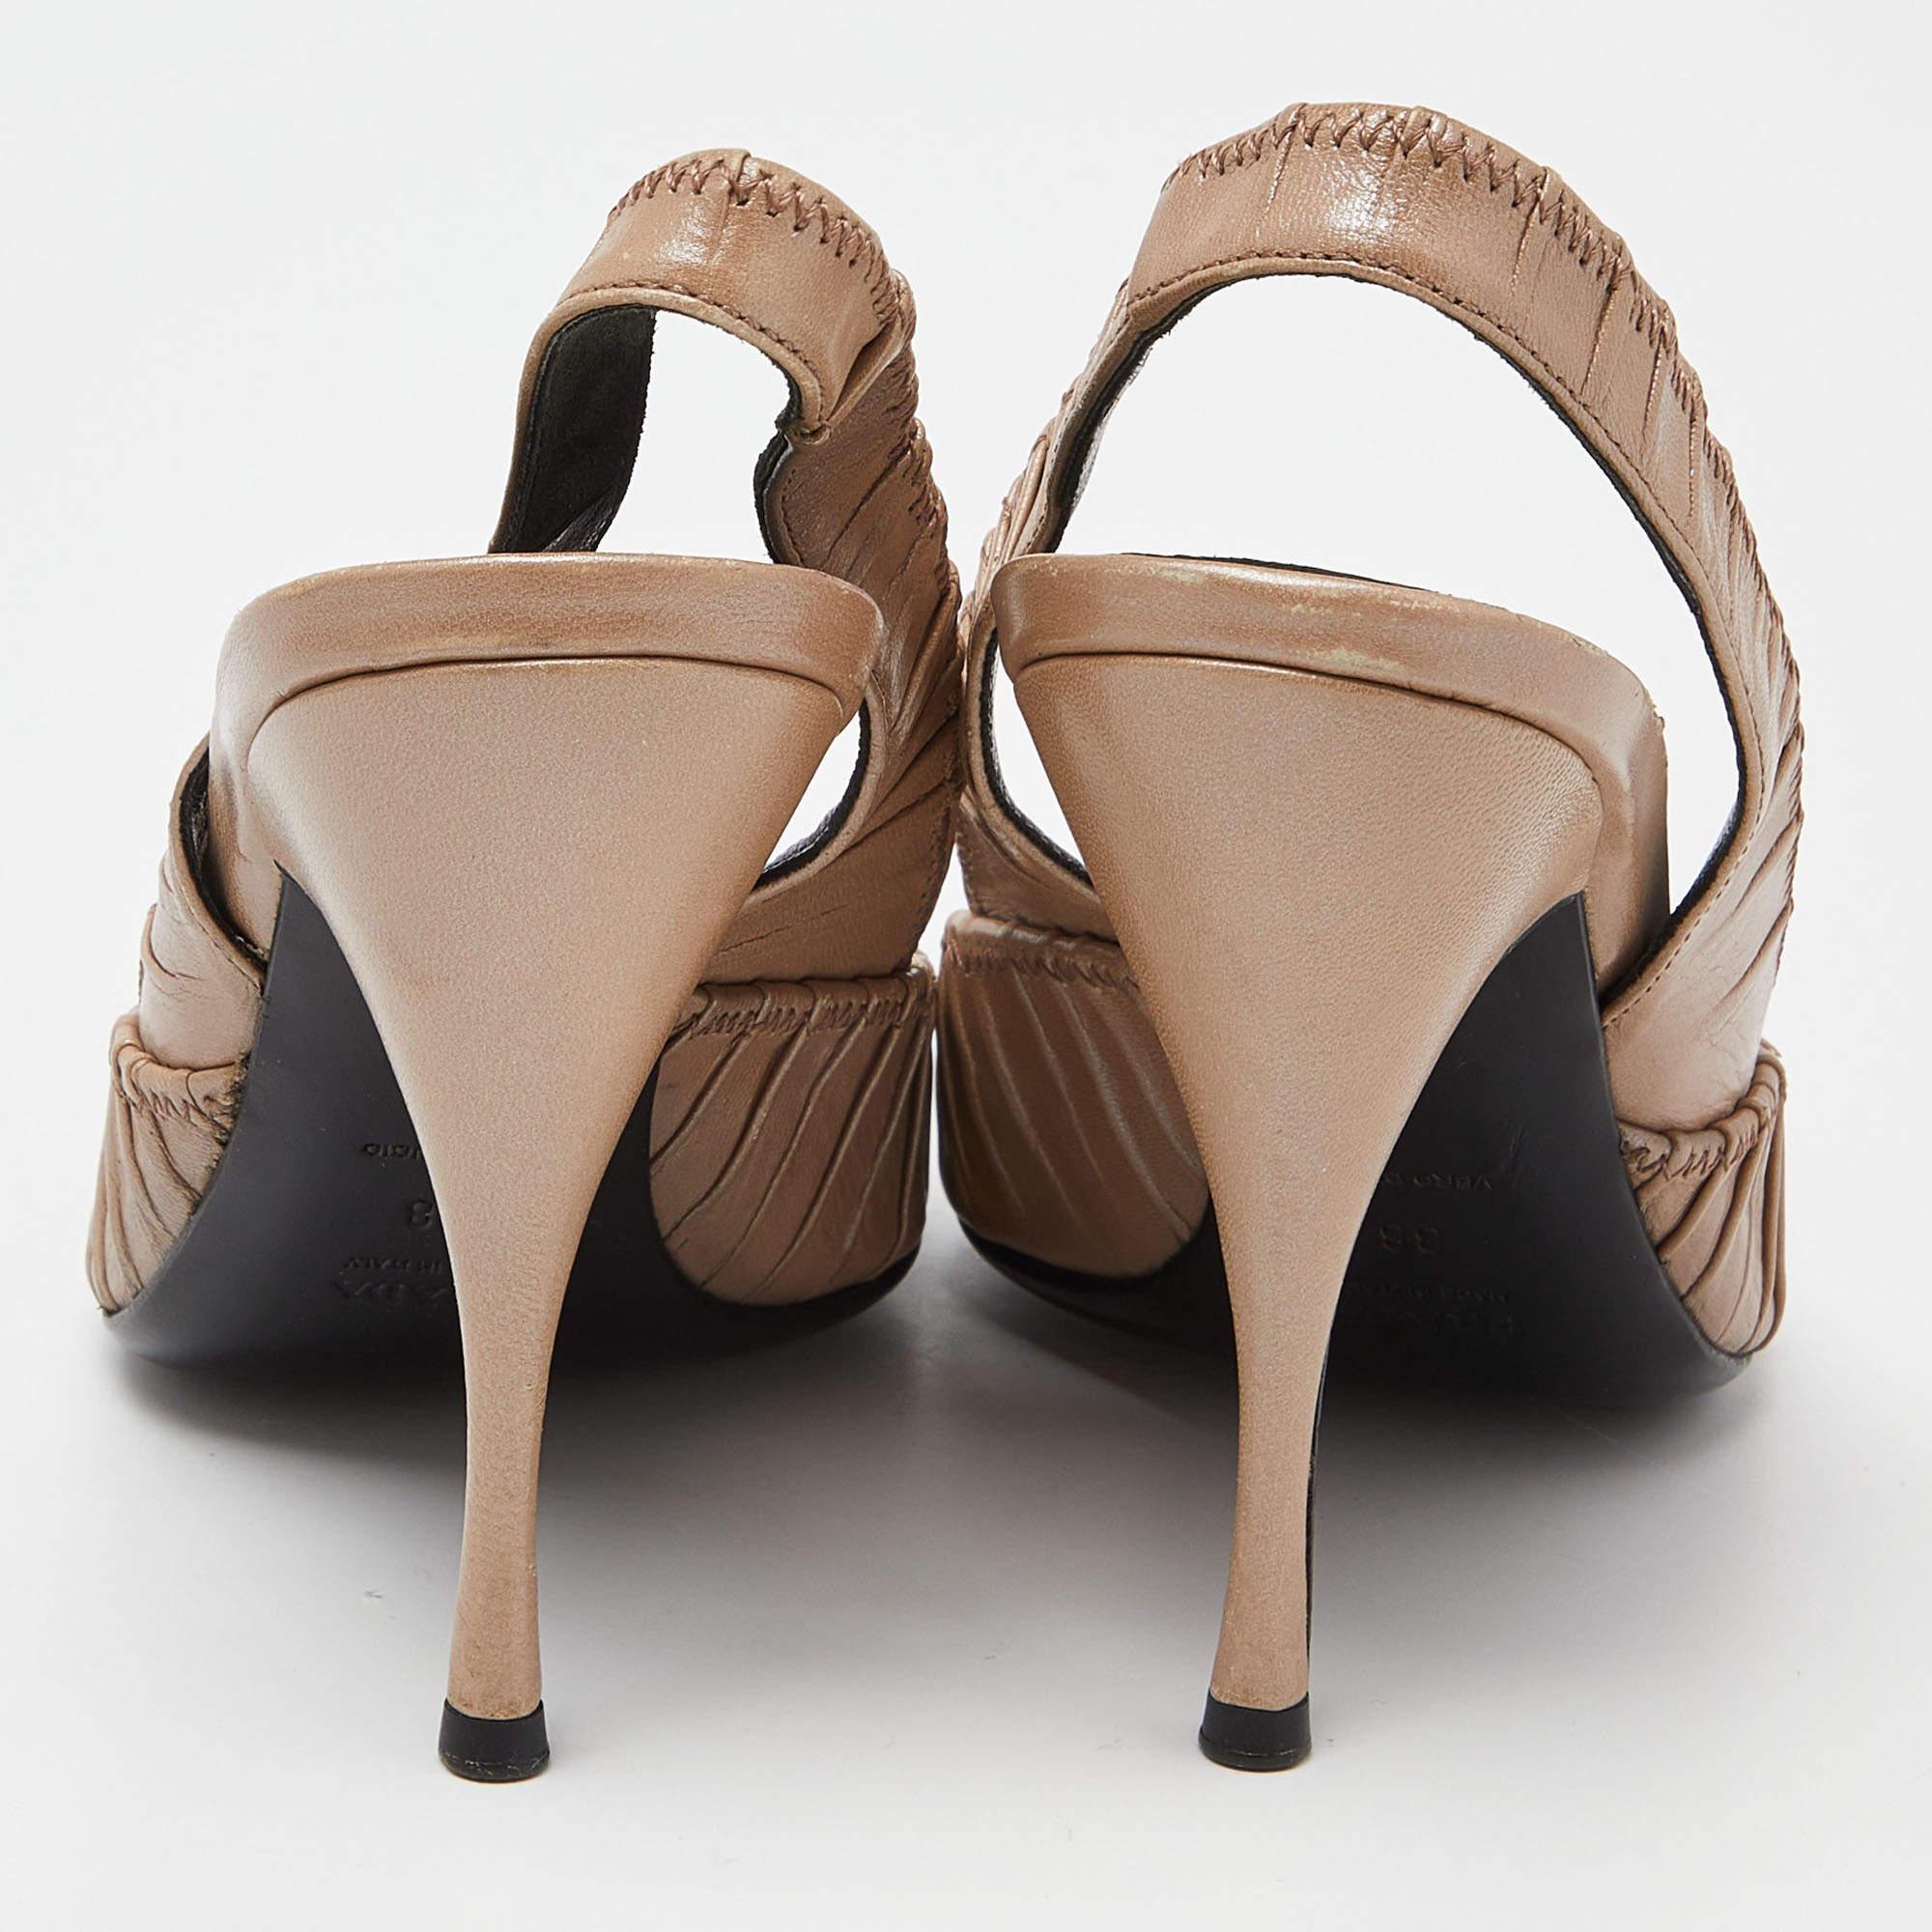 A feminine flair and a sophisticated appeal characterize these stunning Prada slingback sandals. Crafted using pleated leather in a beige shade, they will add an opulent charm to your look and complement many looks that you would want to create.

